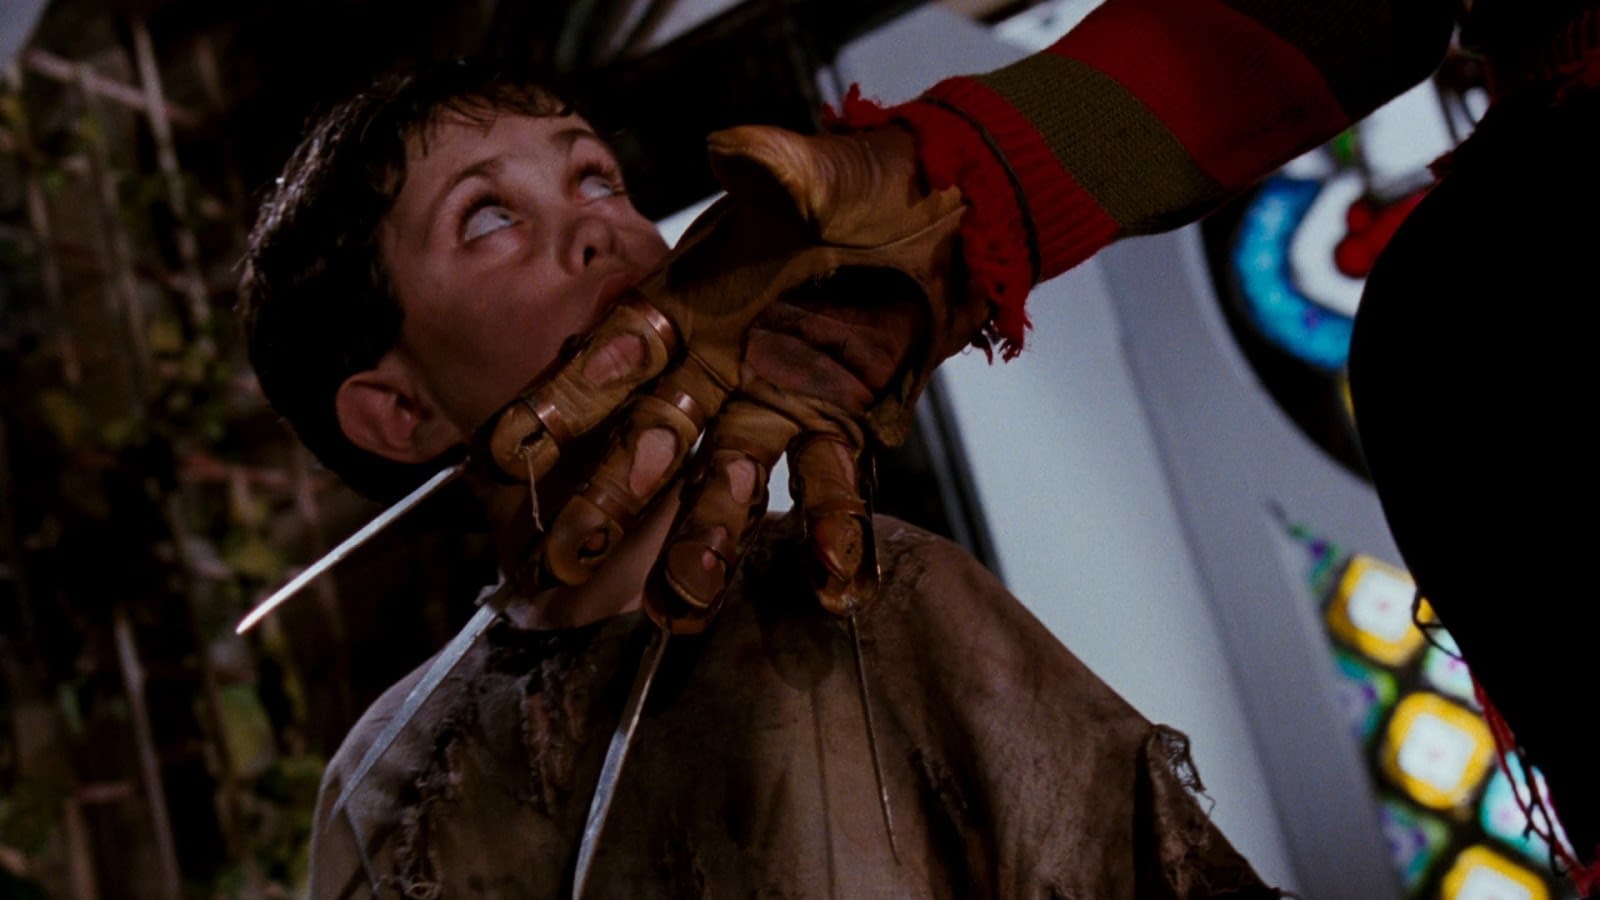 Celebrating "Nightmare on Elm Street: The Dream Child" 30 Years Later